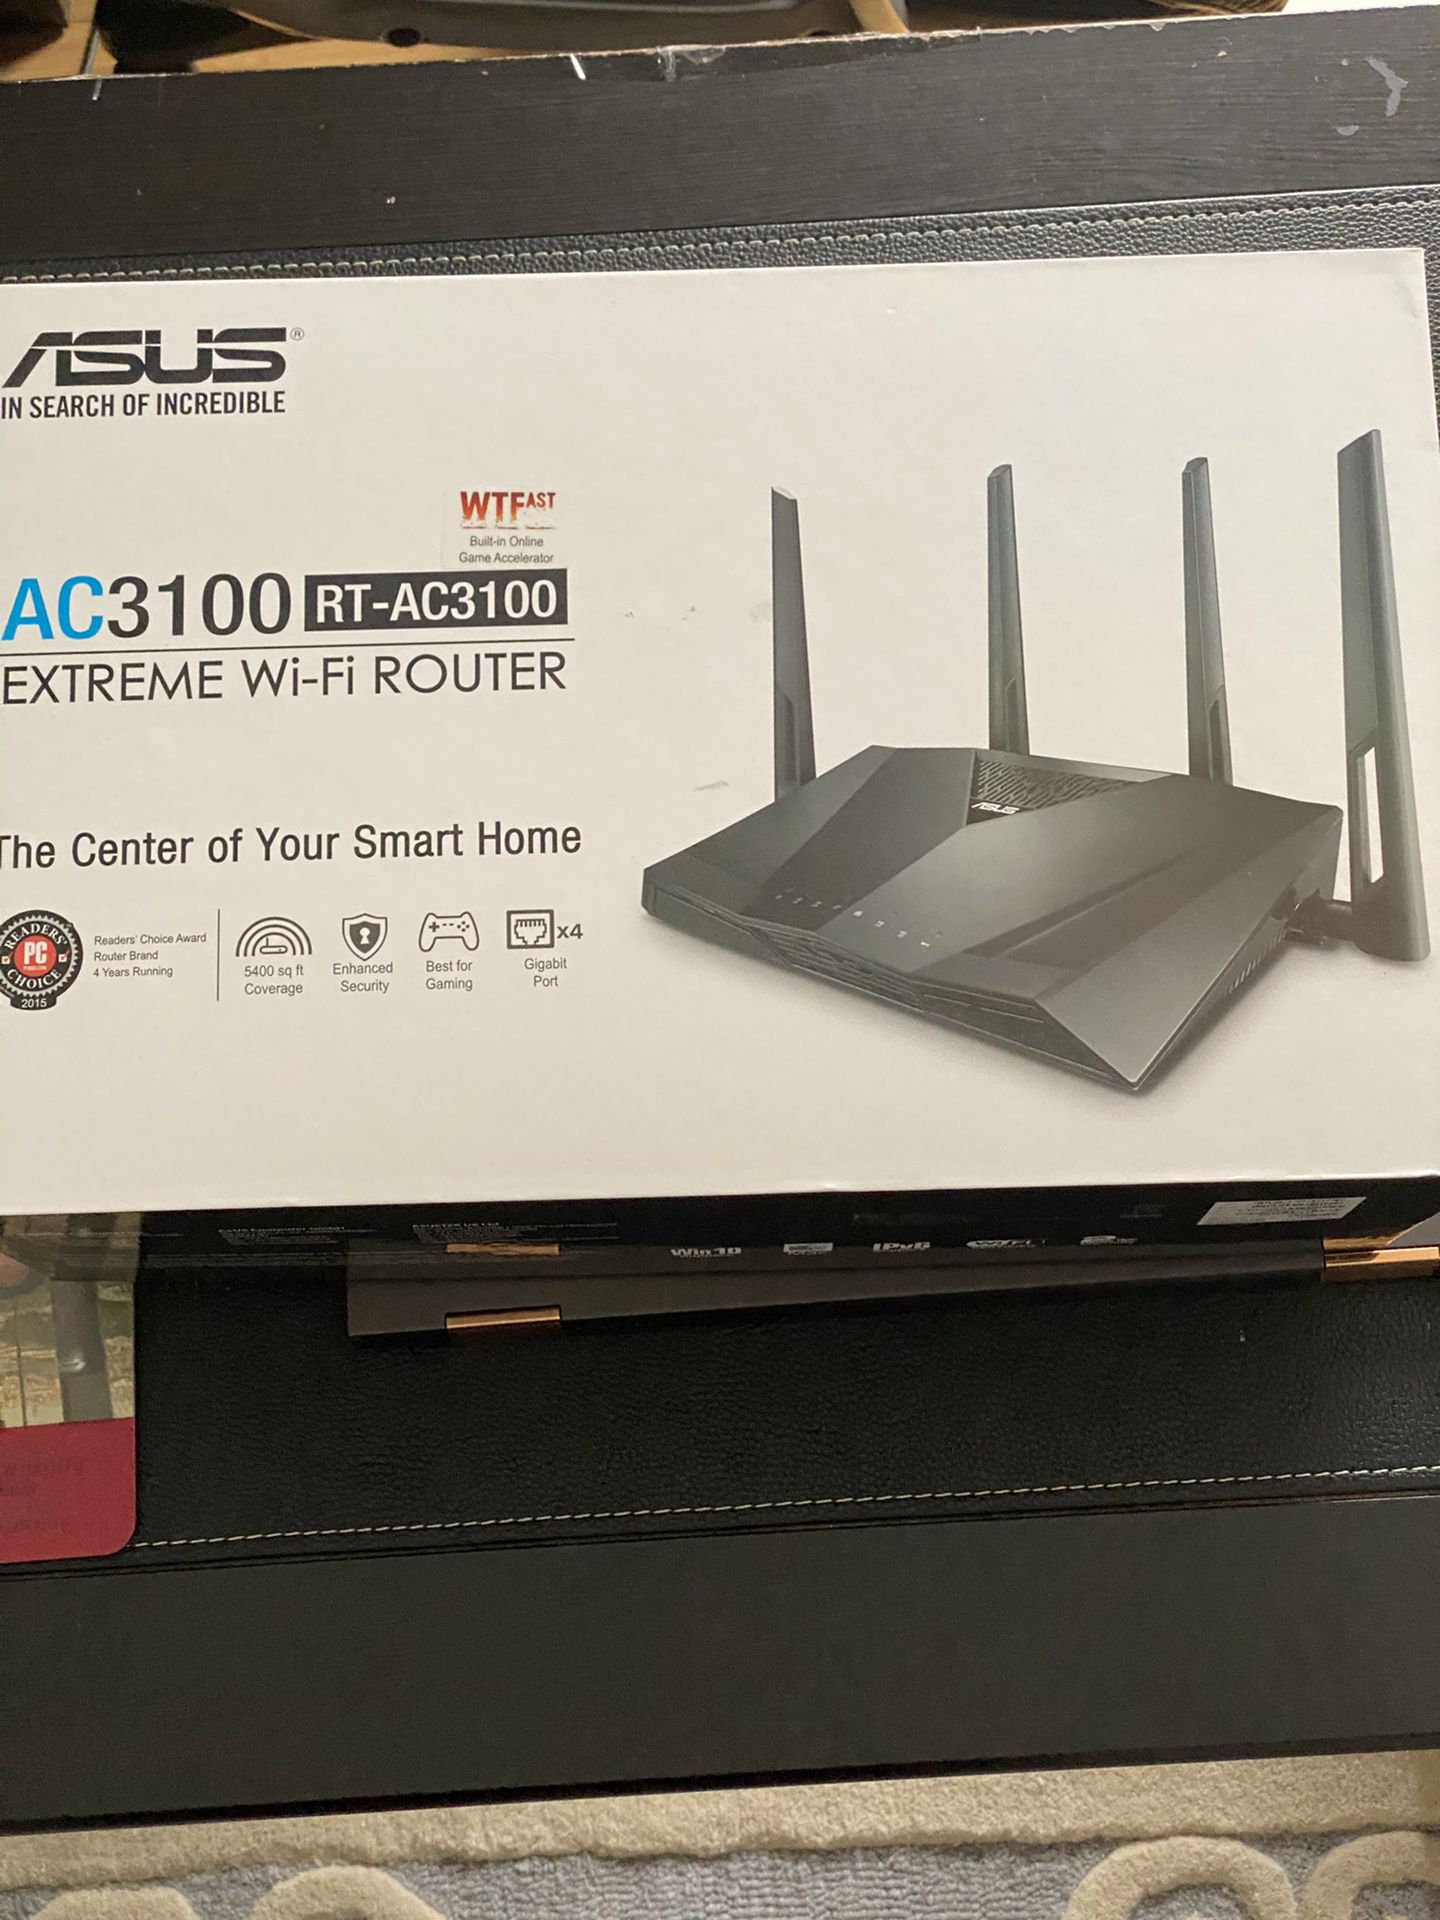 Asus AC3100 RT-AC3100 Wifi Router